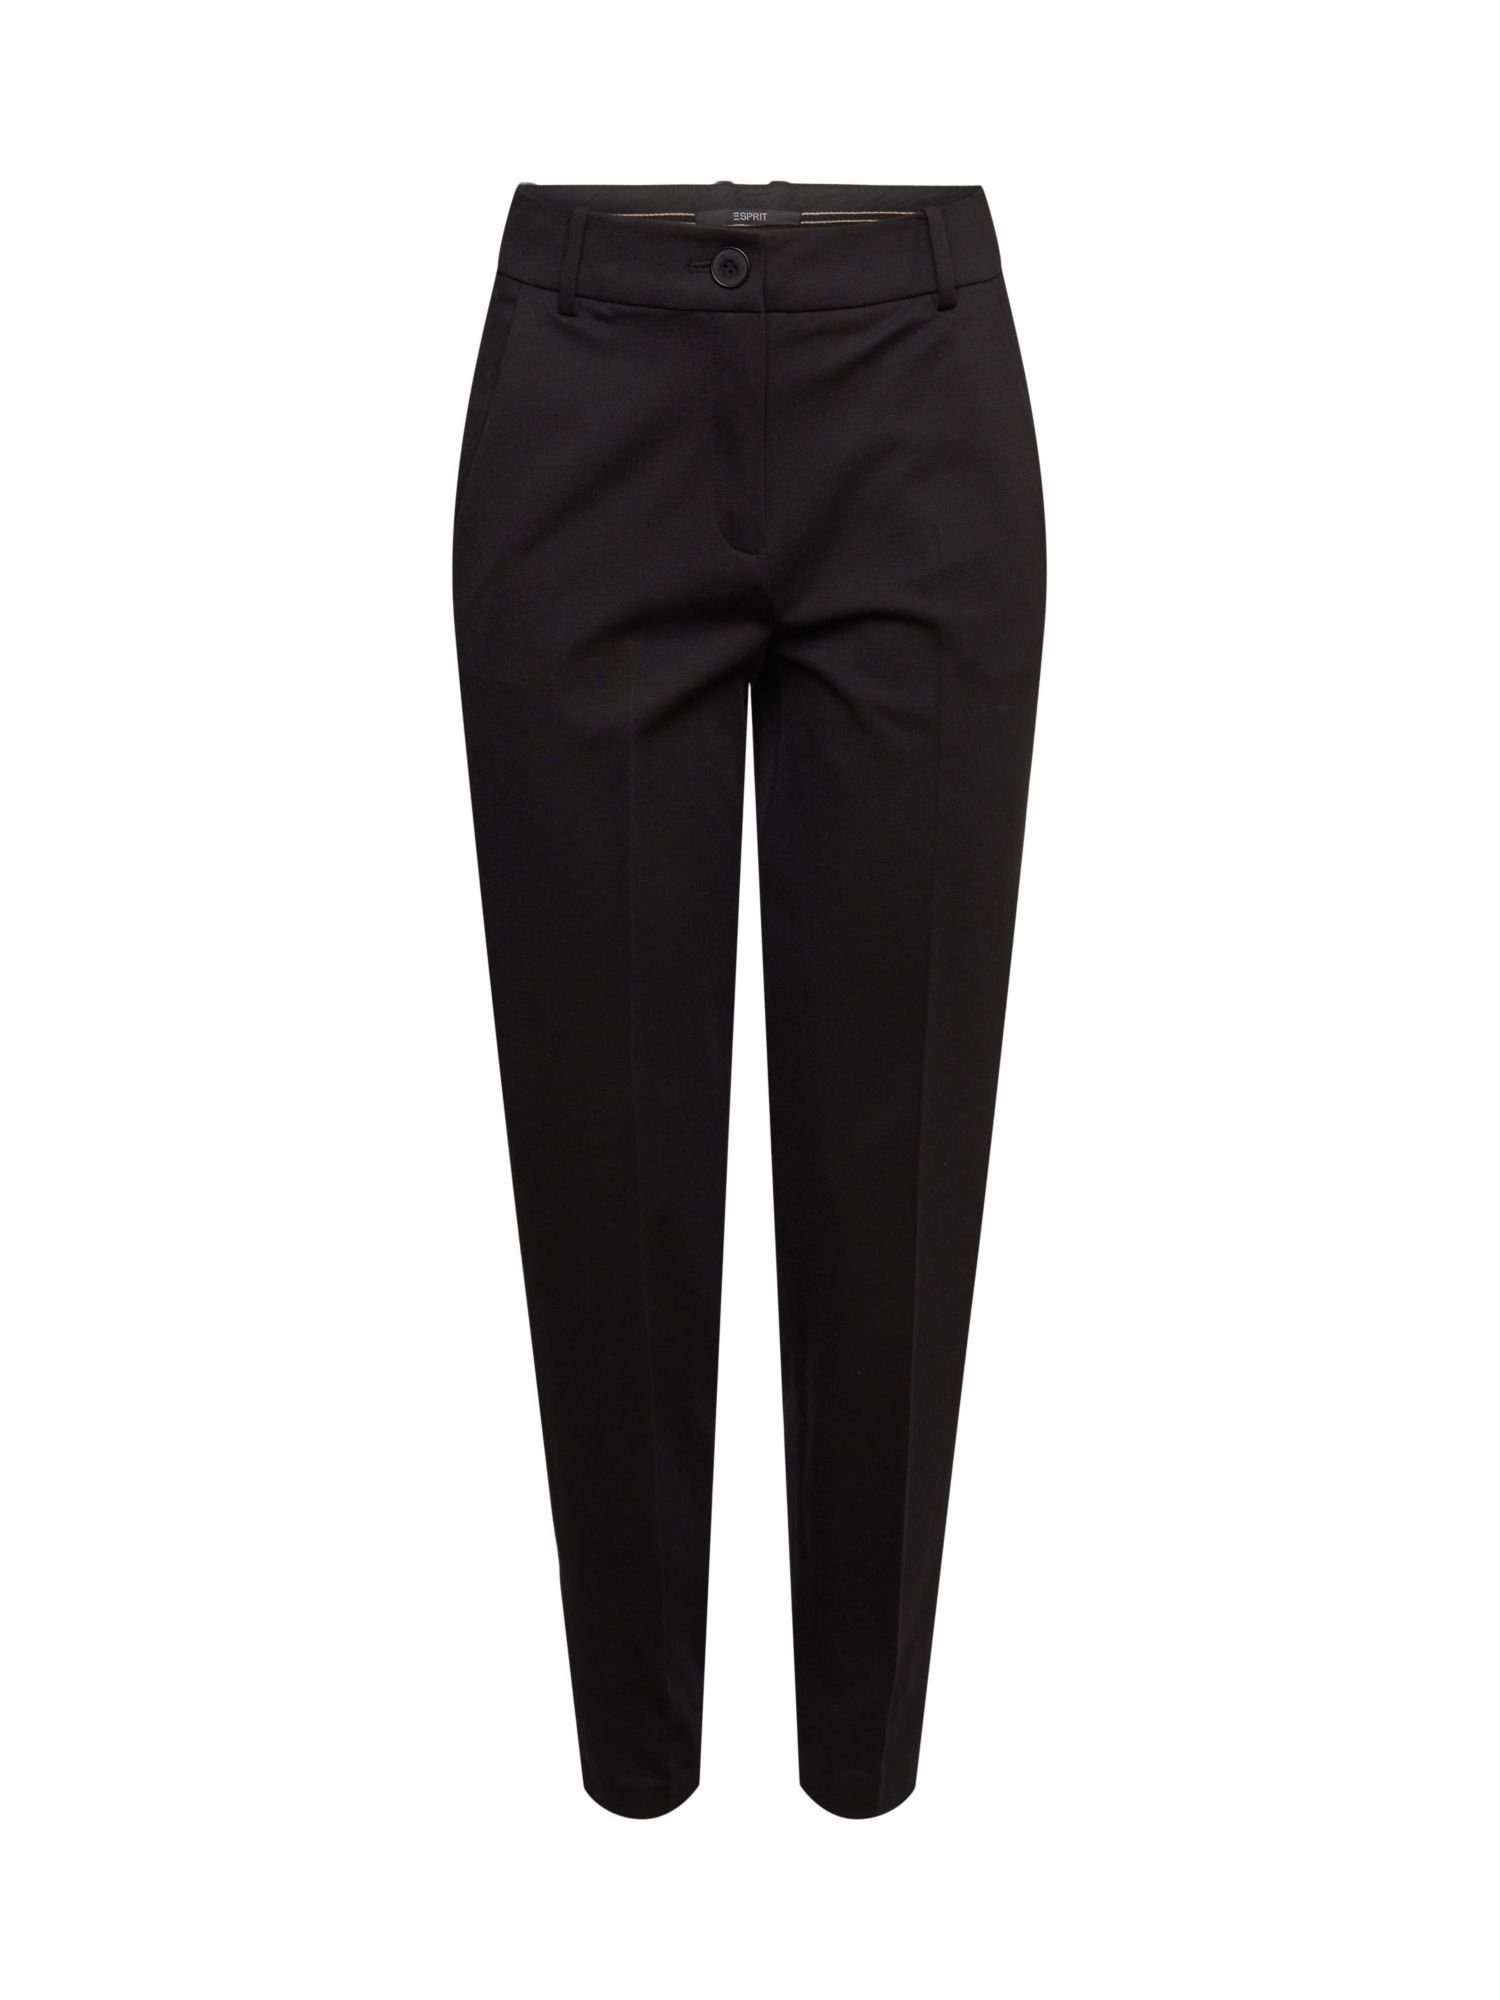 Stretch-Hose BLACK Tapered SPORTY Mix Esprit & PUNTO Match Collection Pants